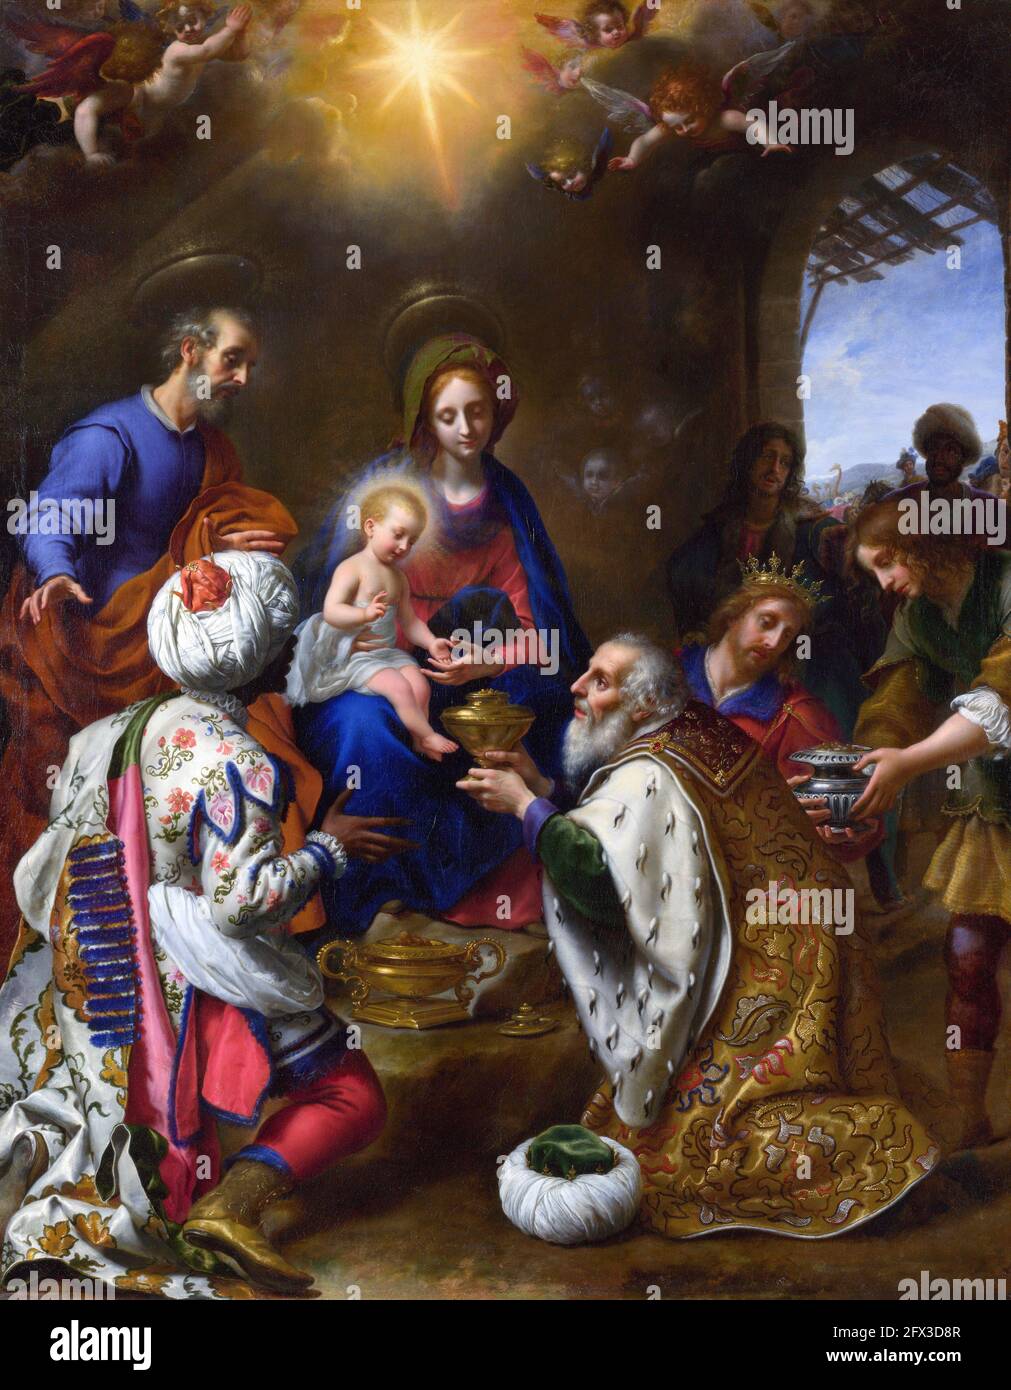 Nativity Scene. The Adoration of the Kings by Carlo Dolci (1616-1686), oil on canvas, 1649. Baby Jesus receiving gifts from the Magi. Stock Photo